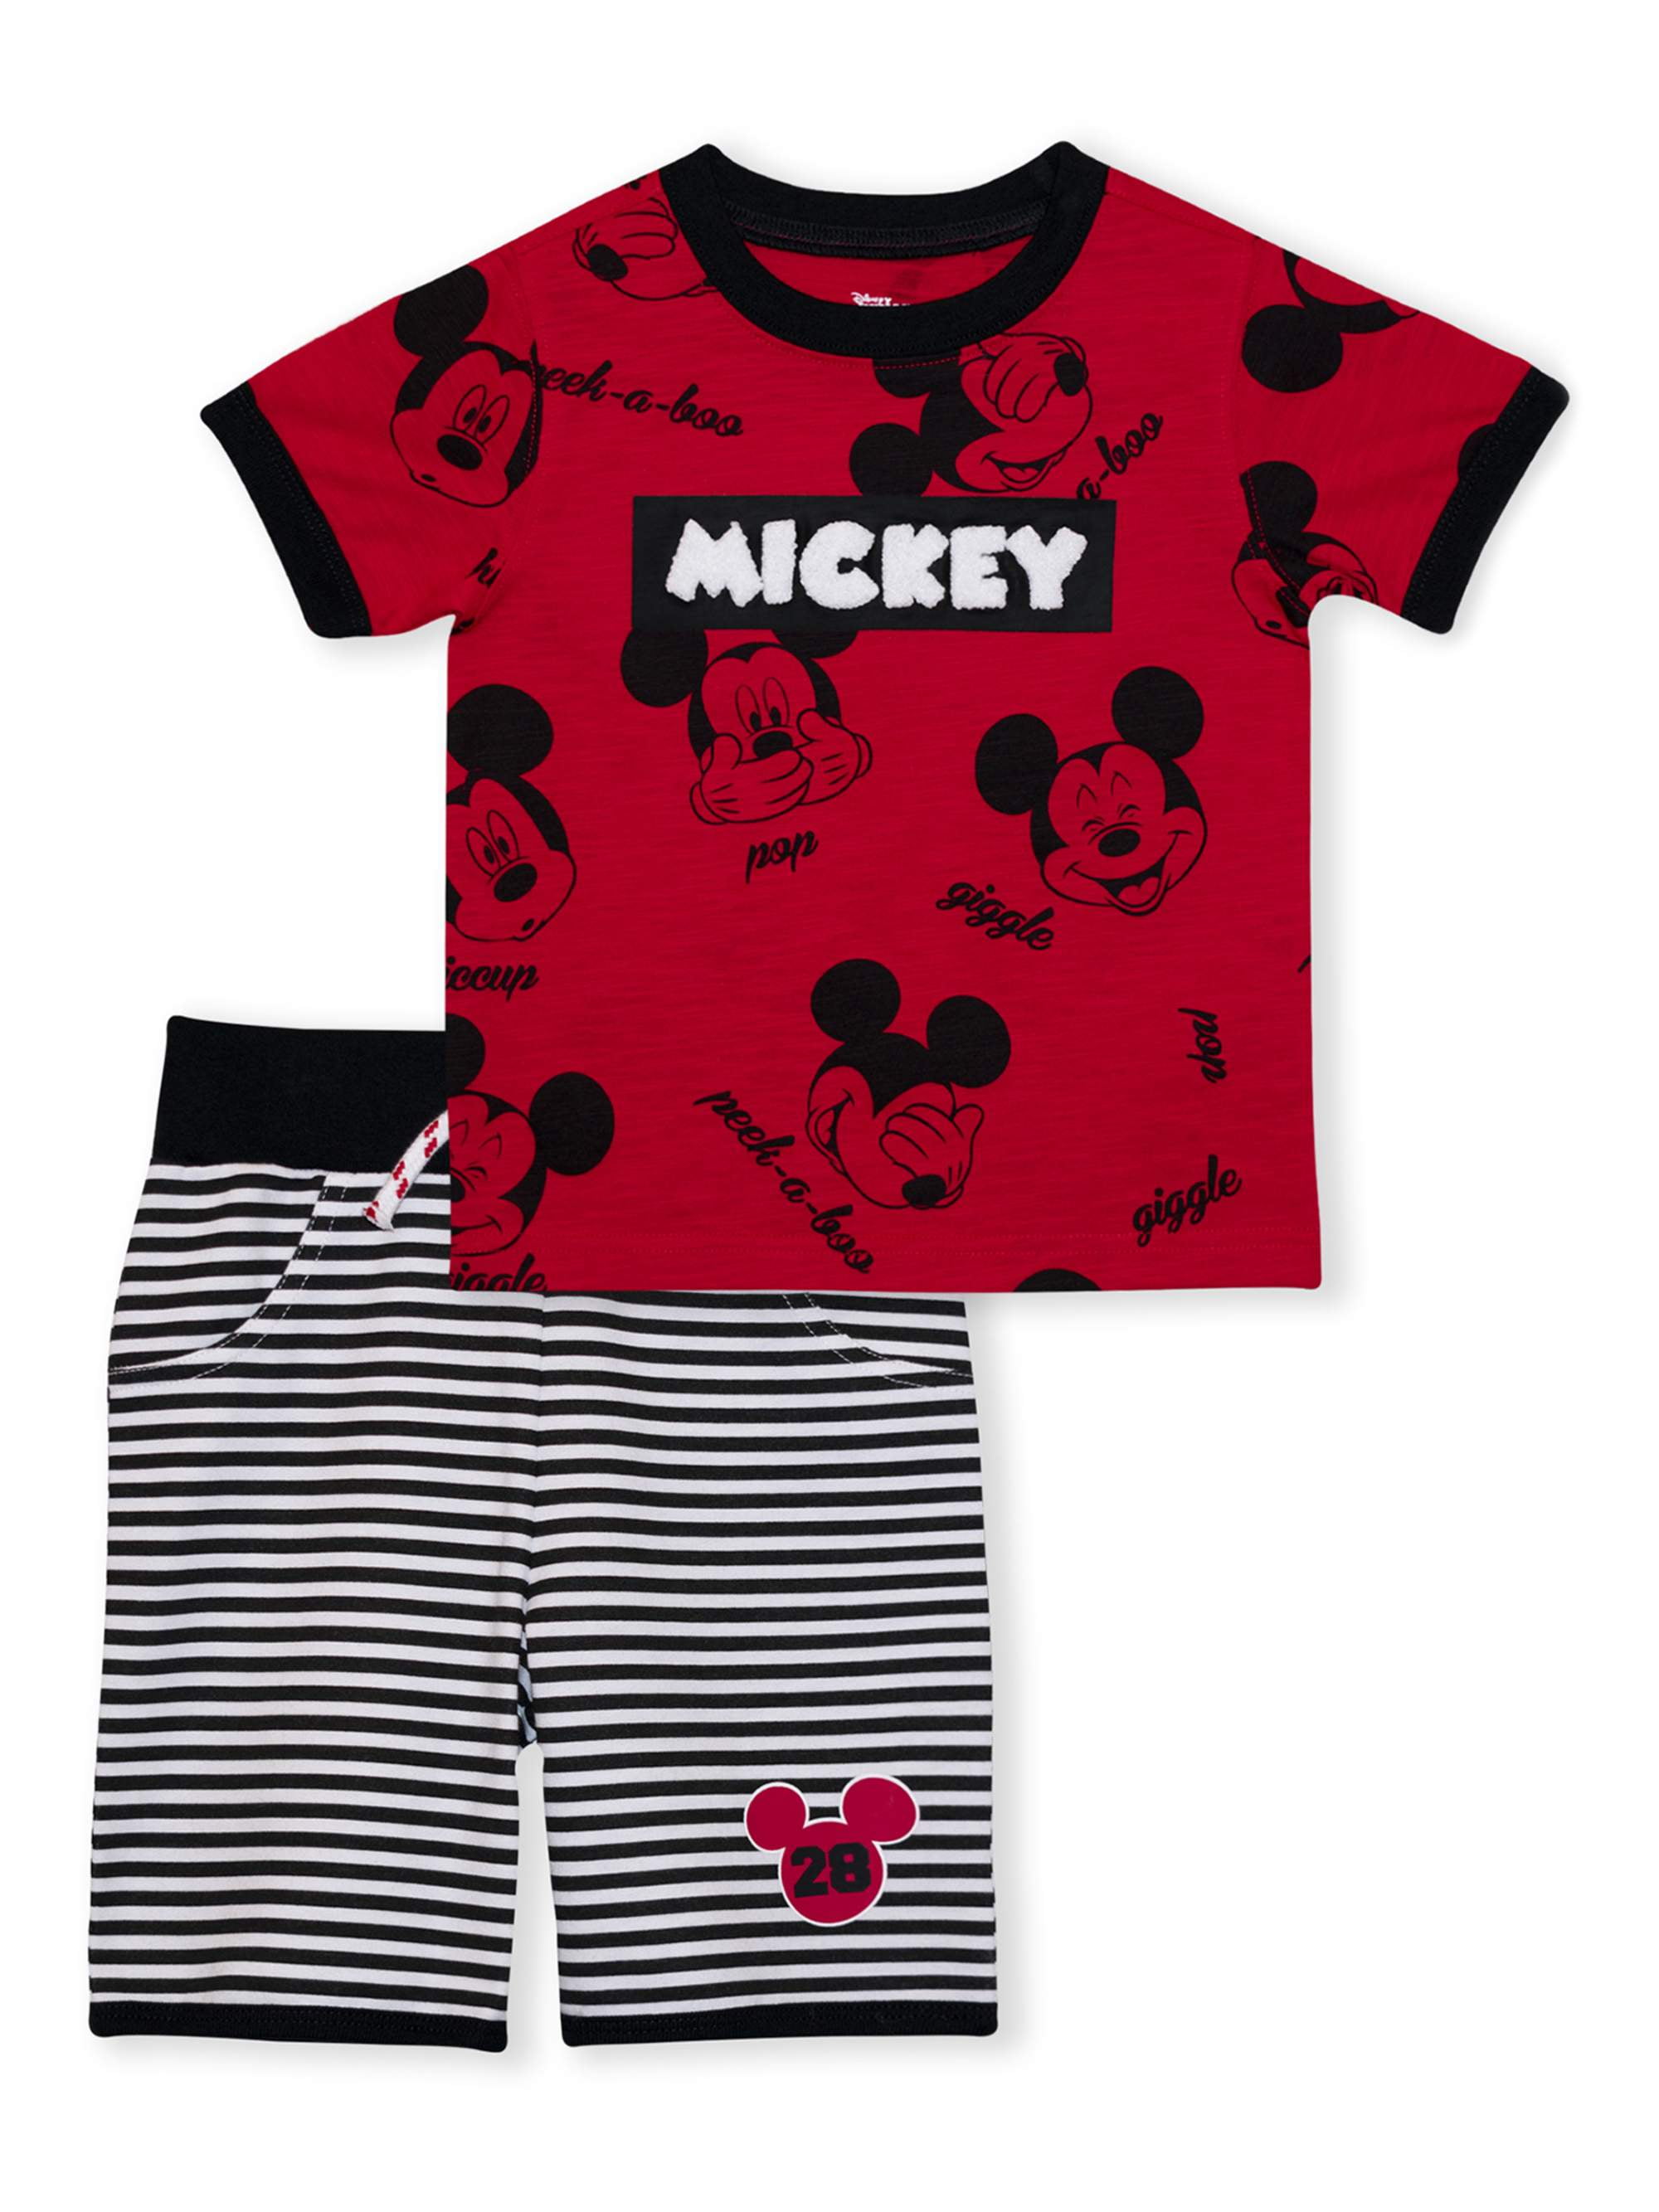 New 2Pcs Baby Boy Mickey Mouse BOY T-shirt Tops Shorts Kids Casual Outfits 